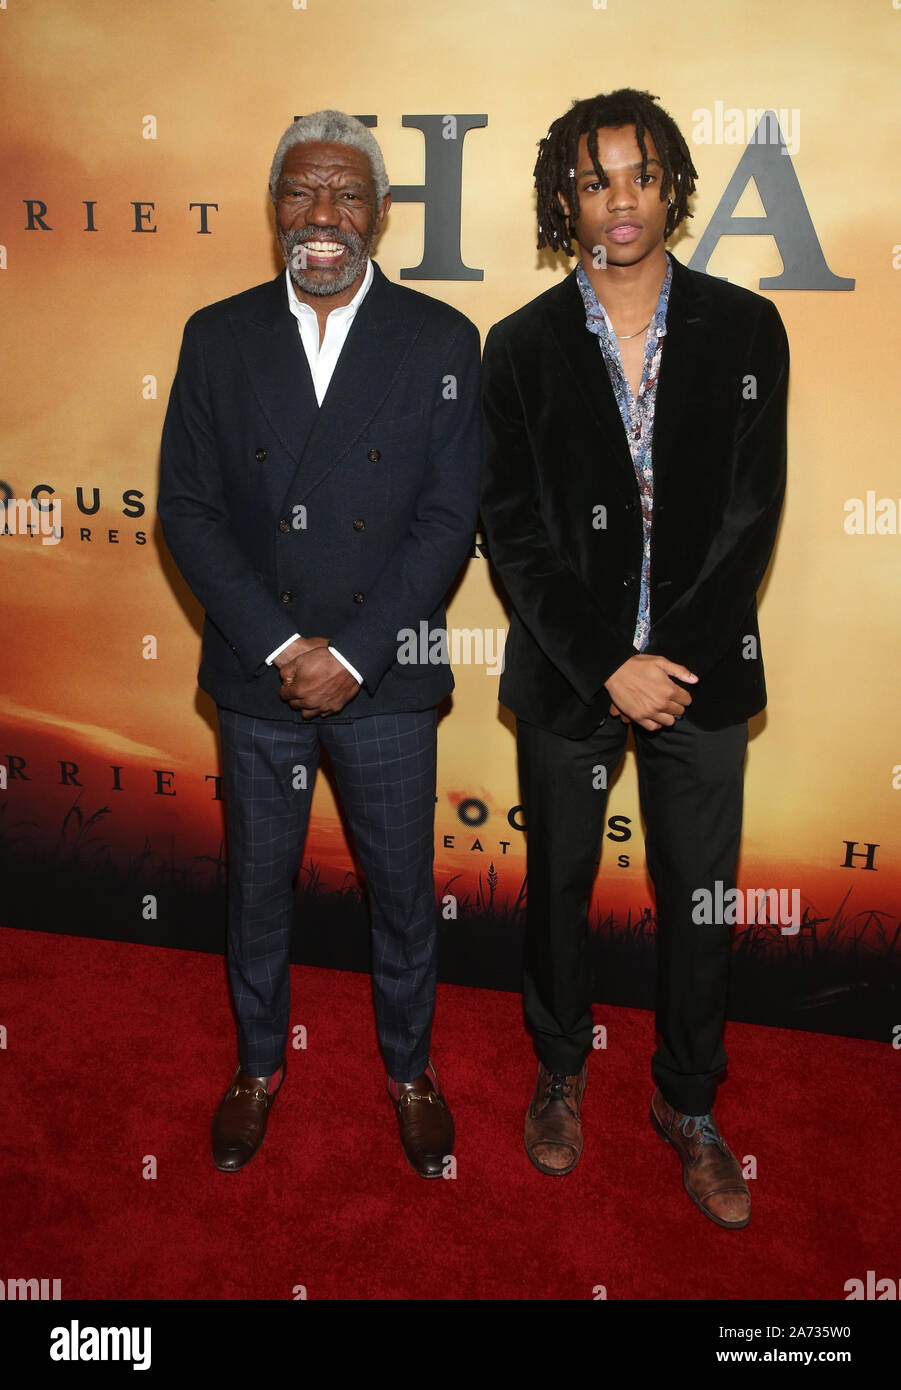 Los Angeles, Ca. 29th Oct, 2019. Vondie Curtis-Hall, Henry Hunter Hall, at the Los Angeles Premiere of Harriet at The Orpheum in Los Angeles, California on October 29, 2019. Credit: Faye Sadou/Media Punch/Alamy Live News Stock Photo